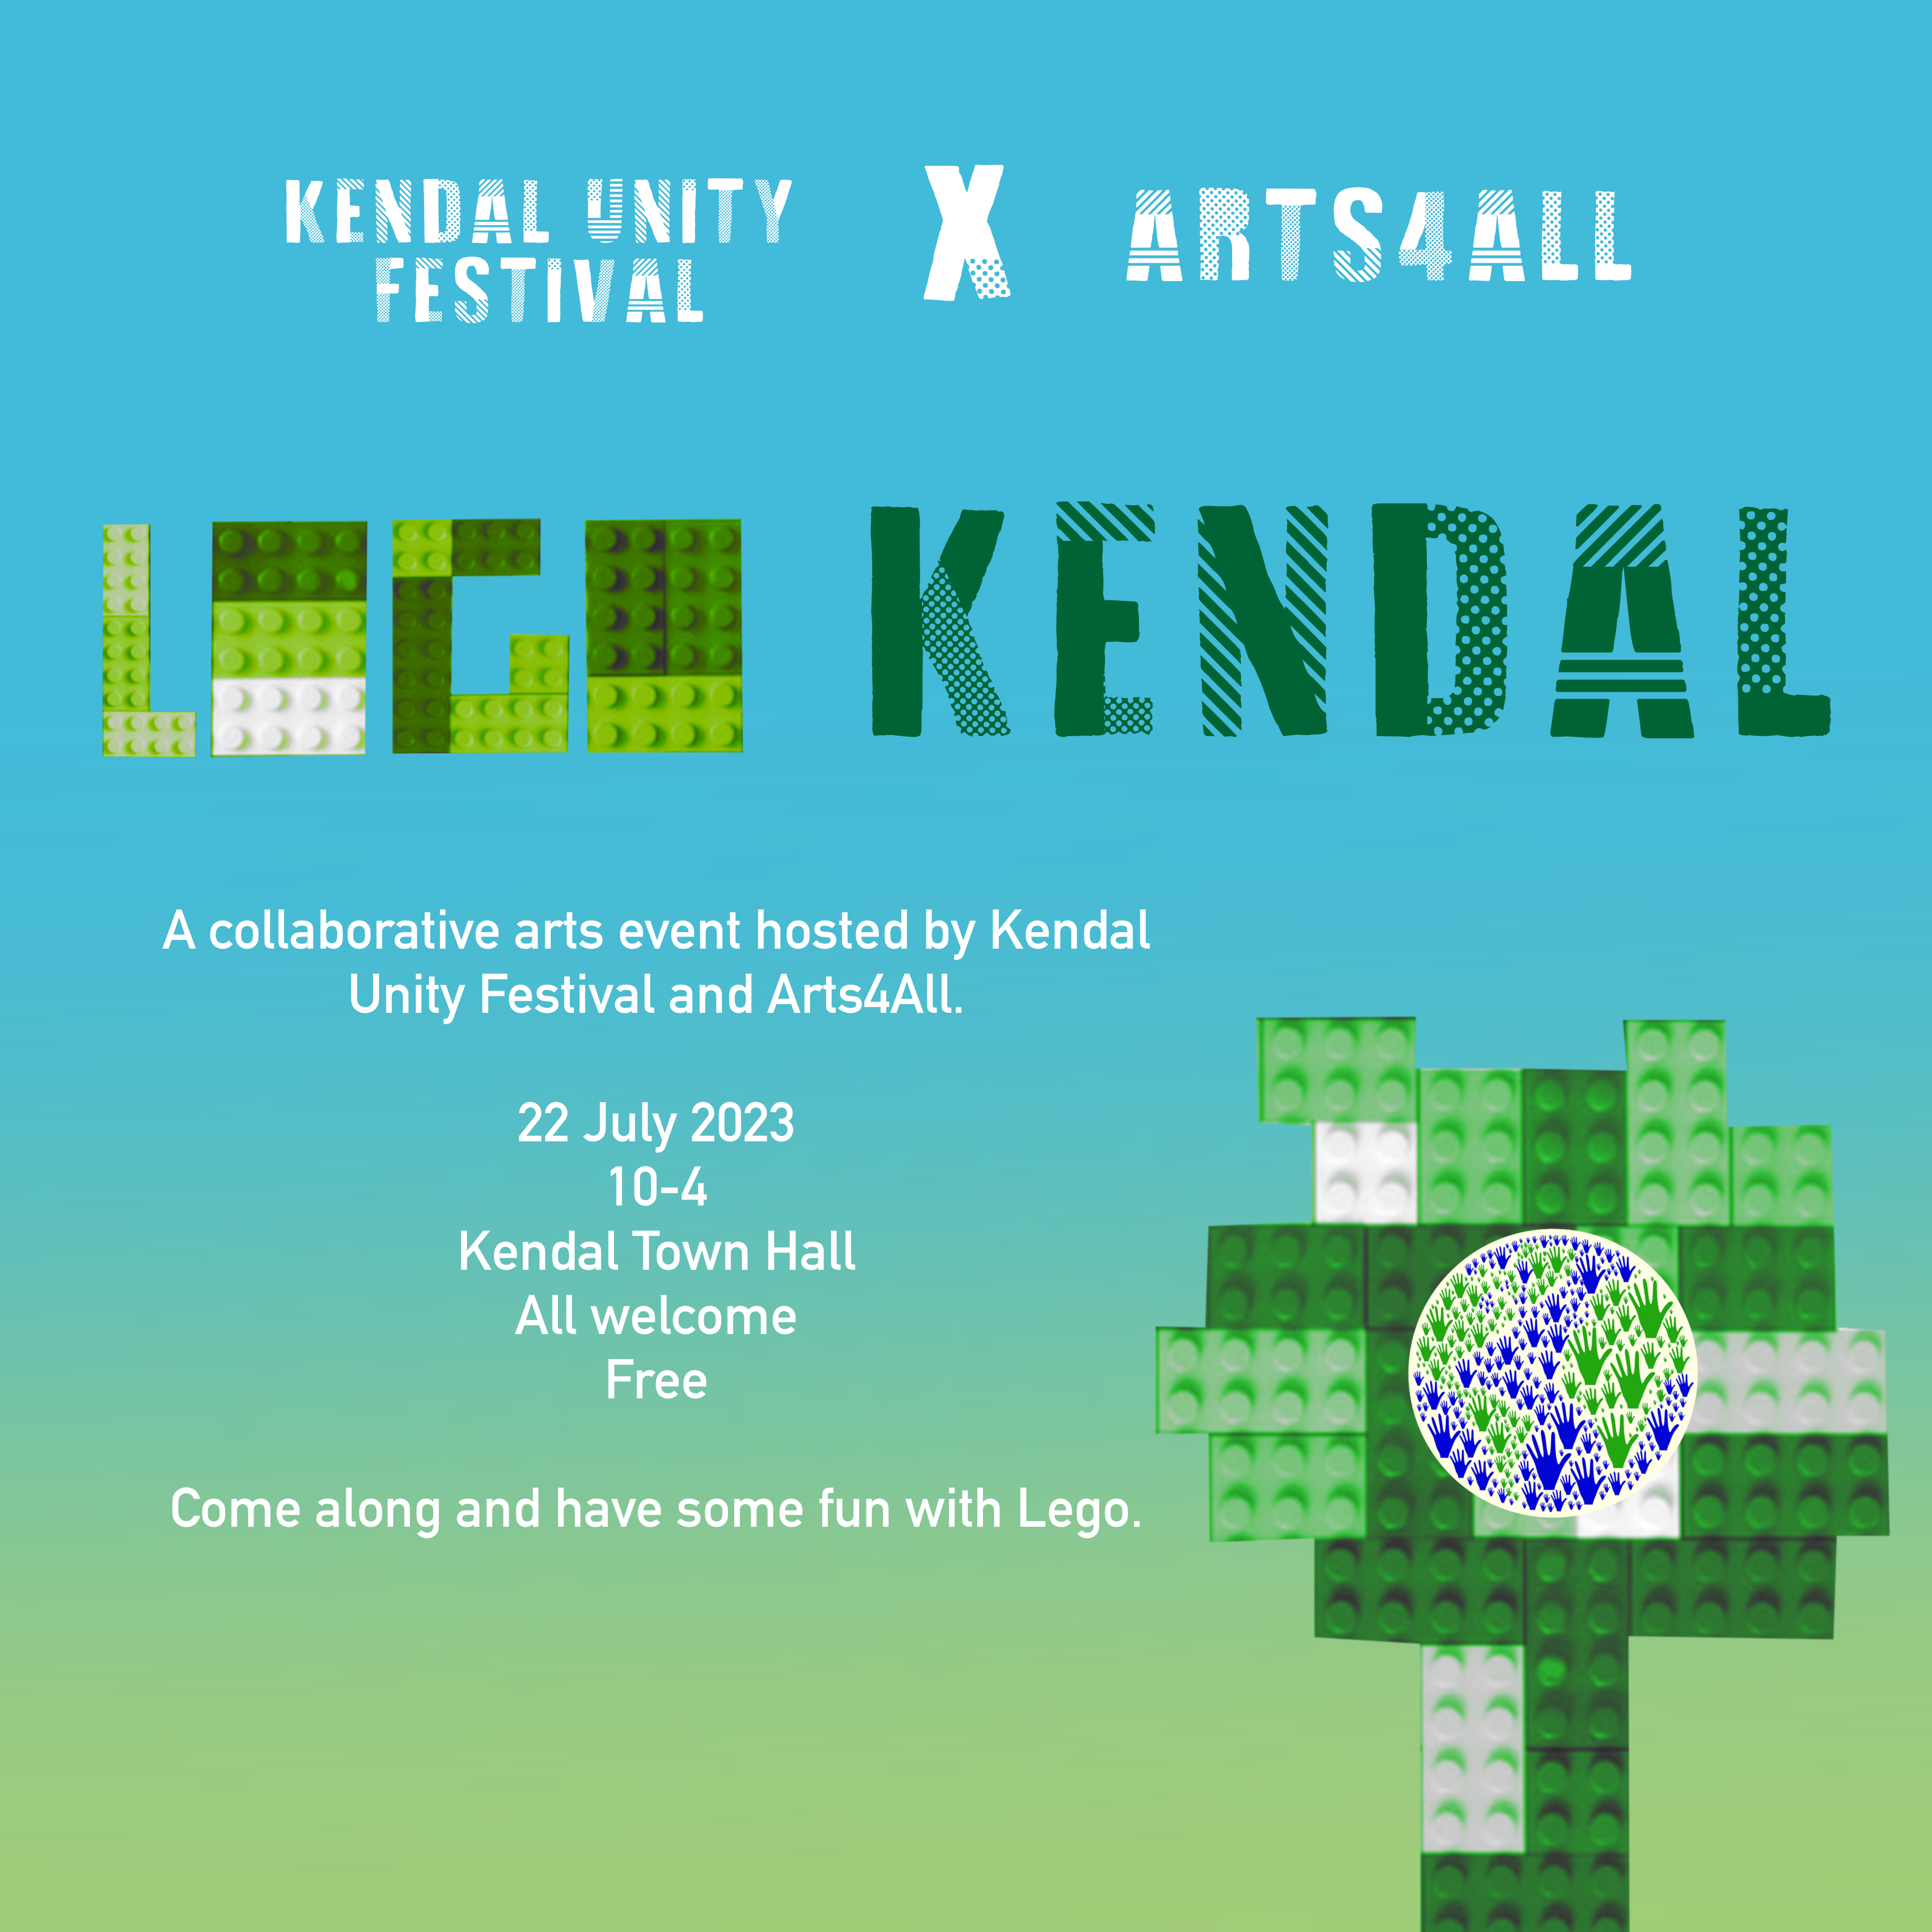 Kendal unity festival in collaboration with Arts4all, welcome you to come along to our collective arts session 22 July 2023 from 10-4pm